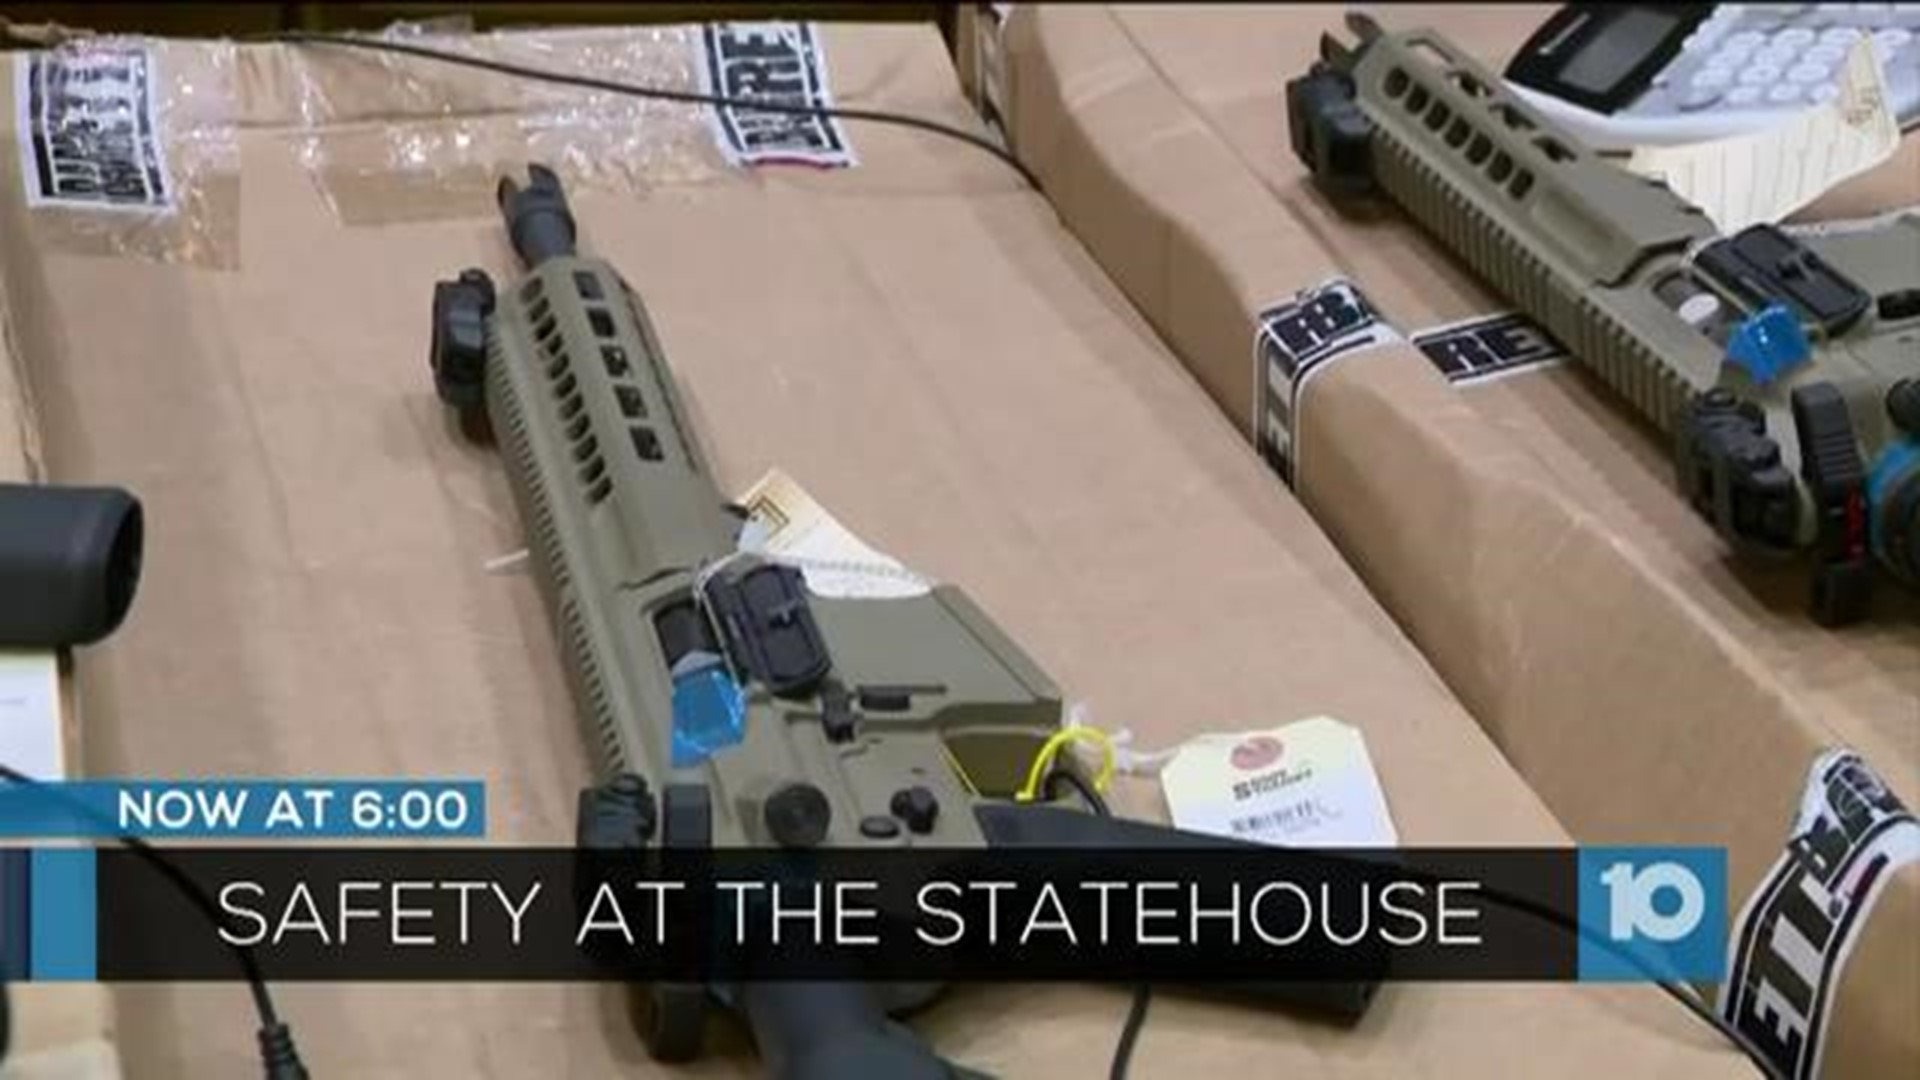 7 proposed gun laws up for debate at Statehouse